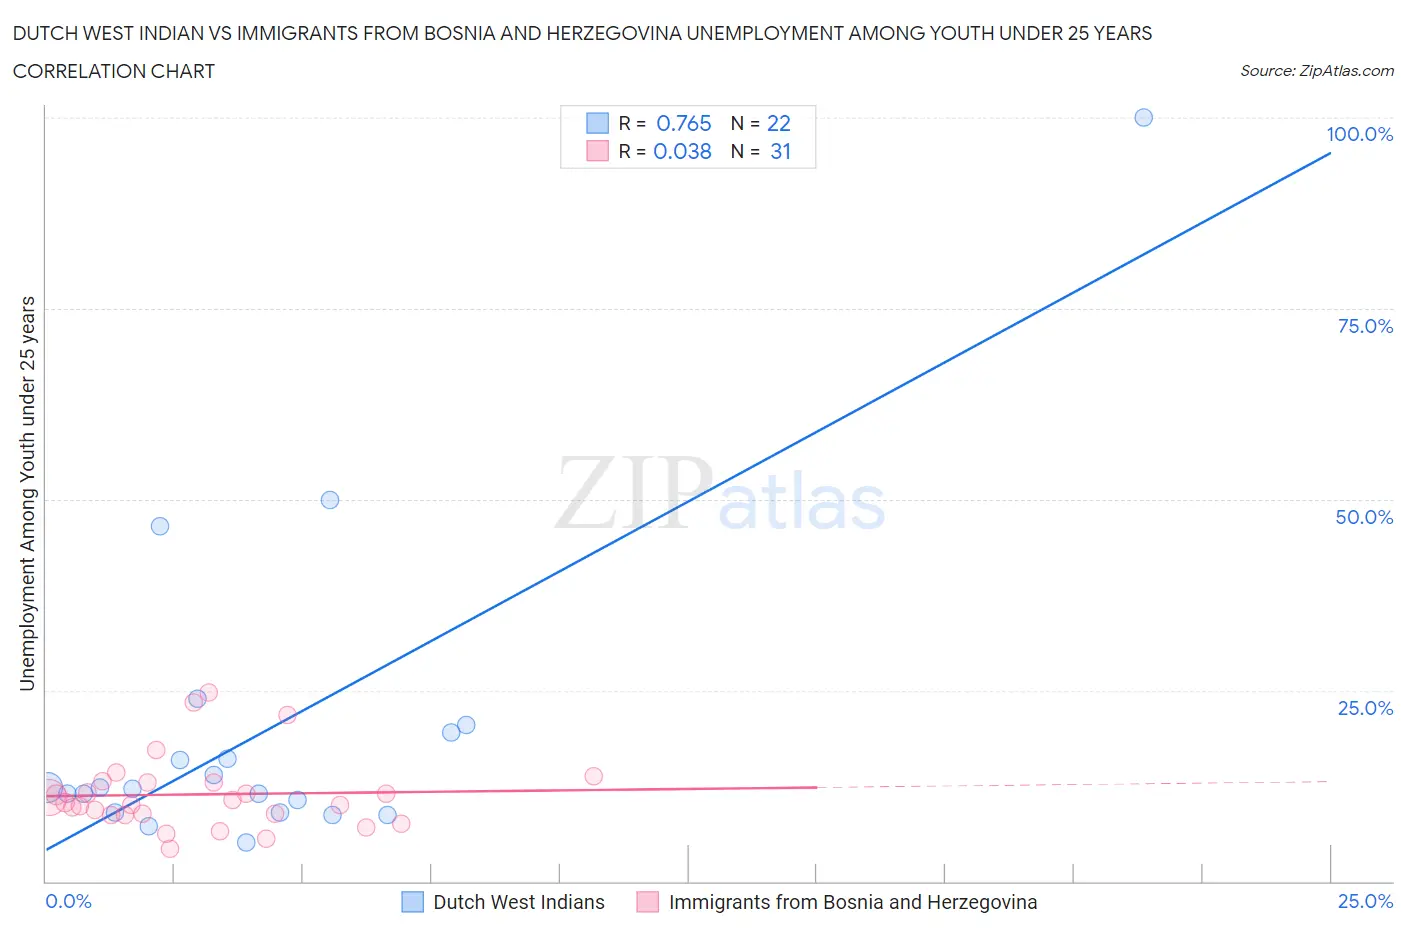 Dutch West Indian vs Immigrants from Bosnia and Herzegovina Unemployment Among Youth under 25 years